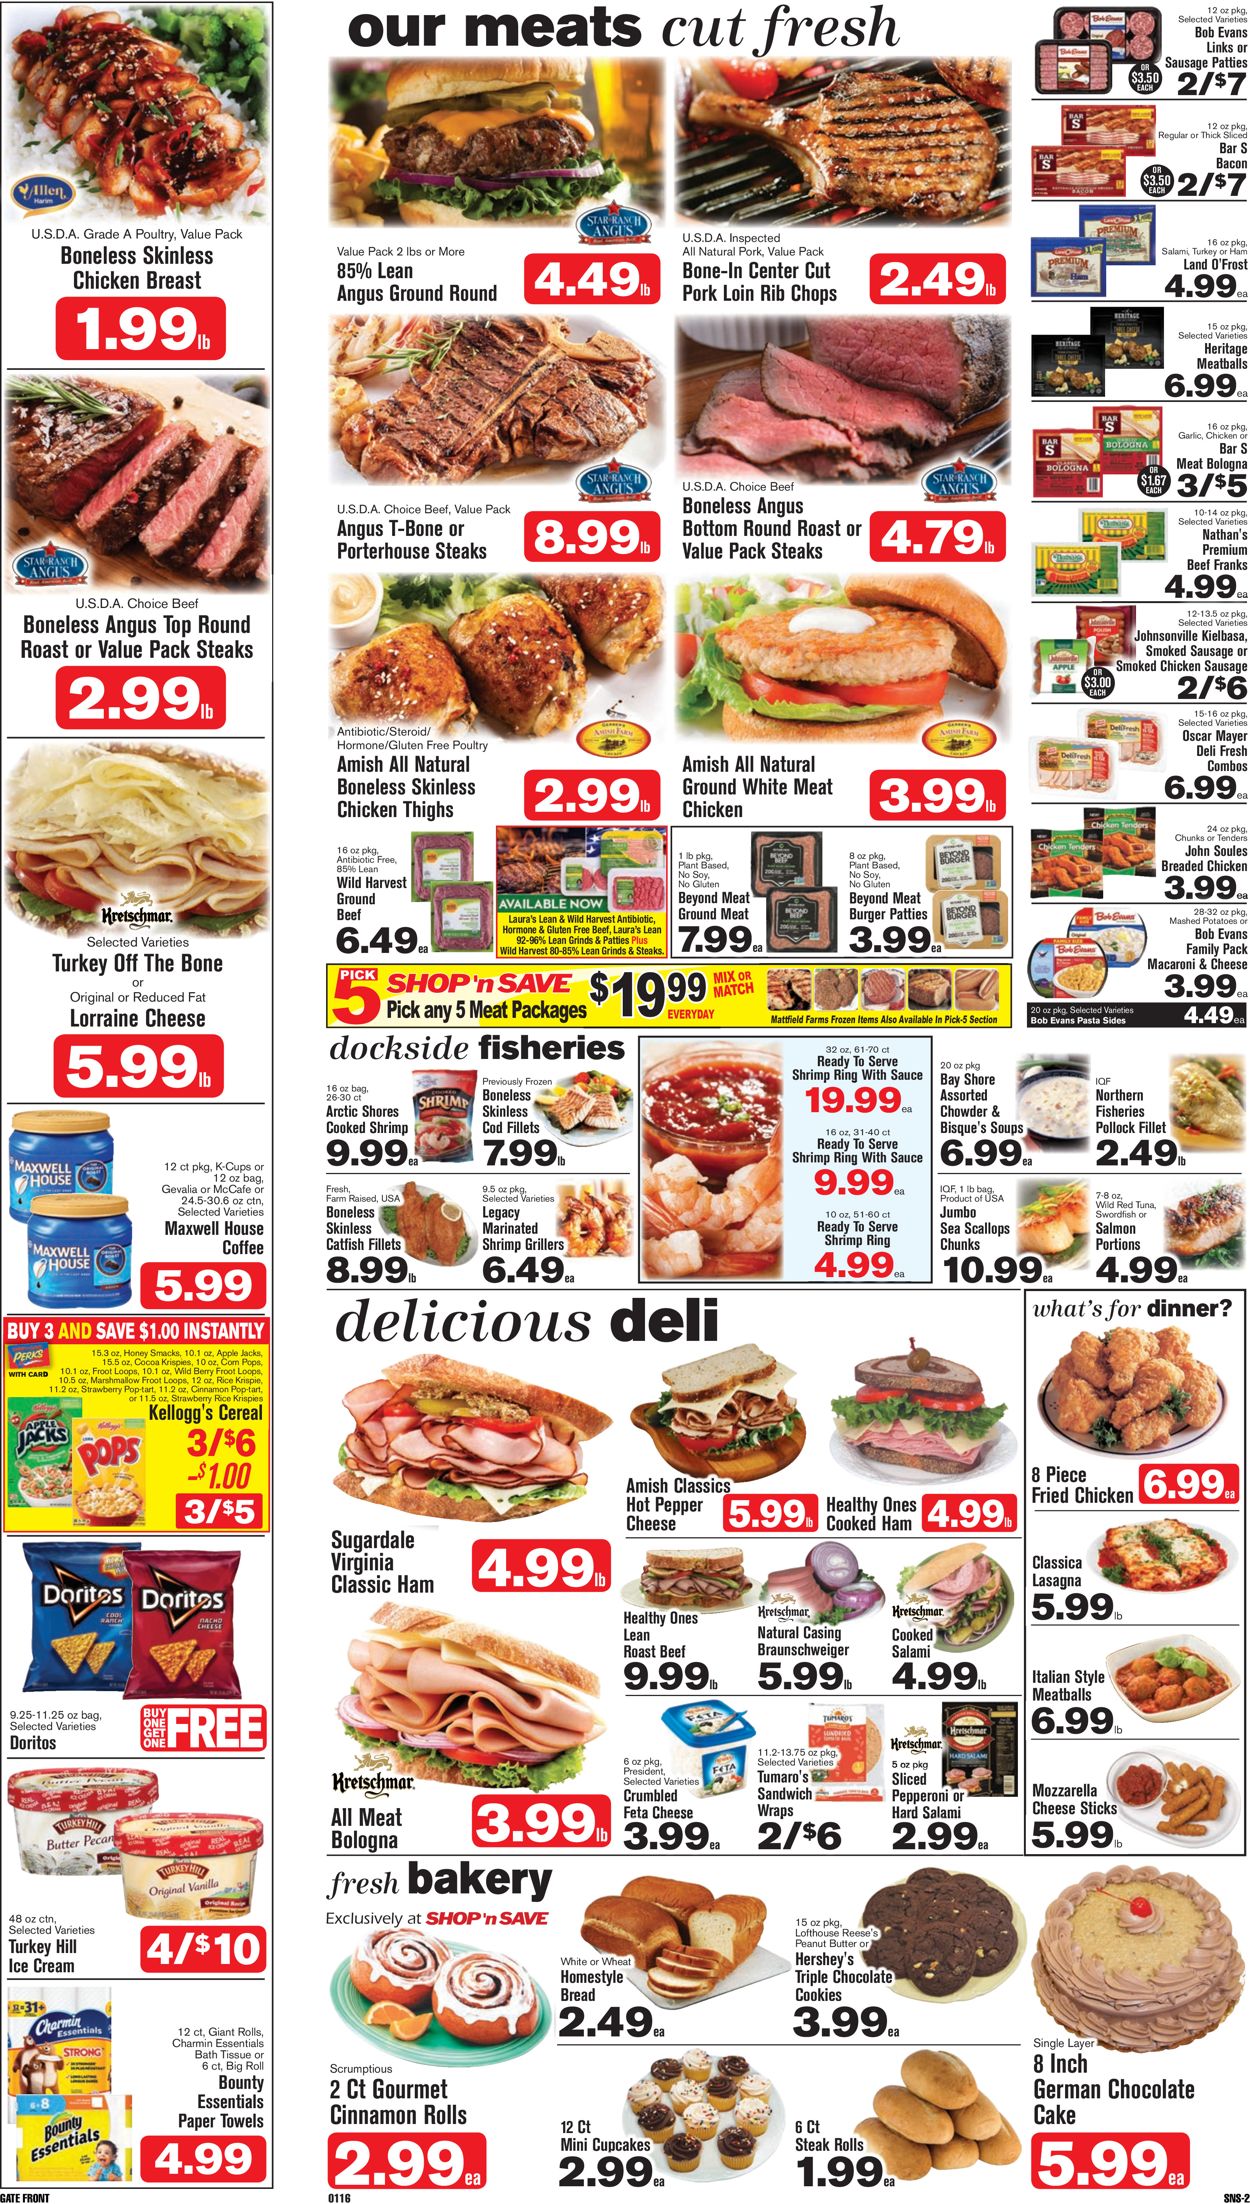 Catalogue Shop ‘n Save from 01/16/2020